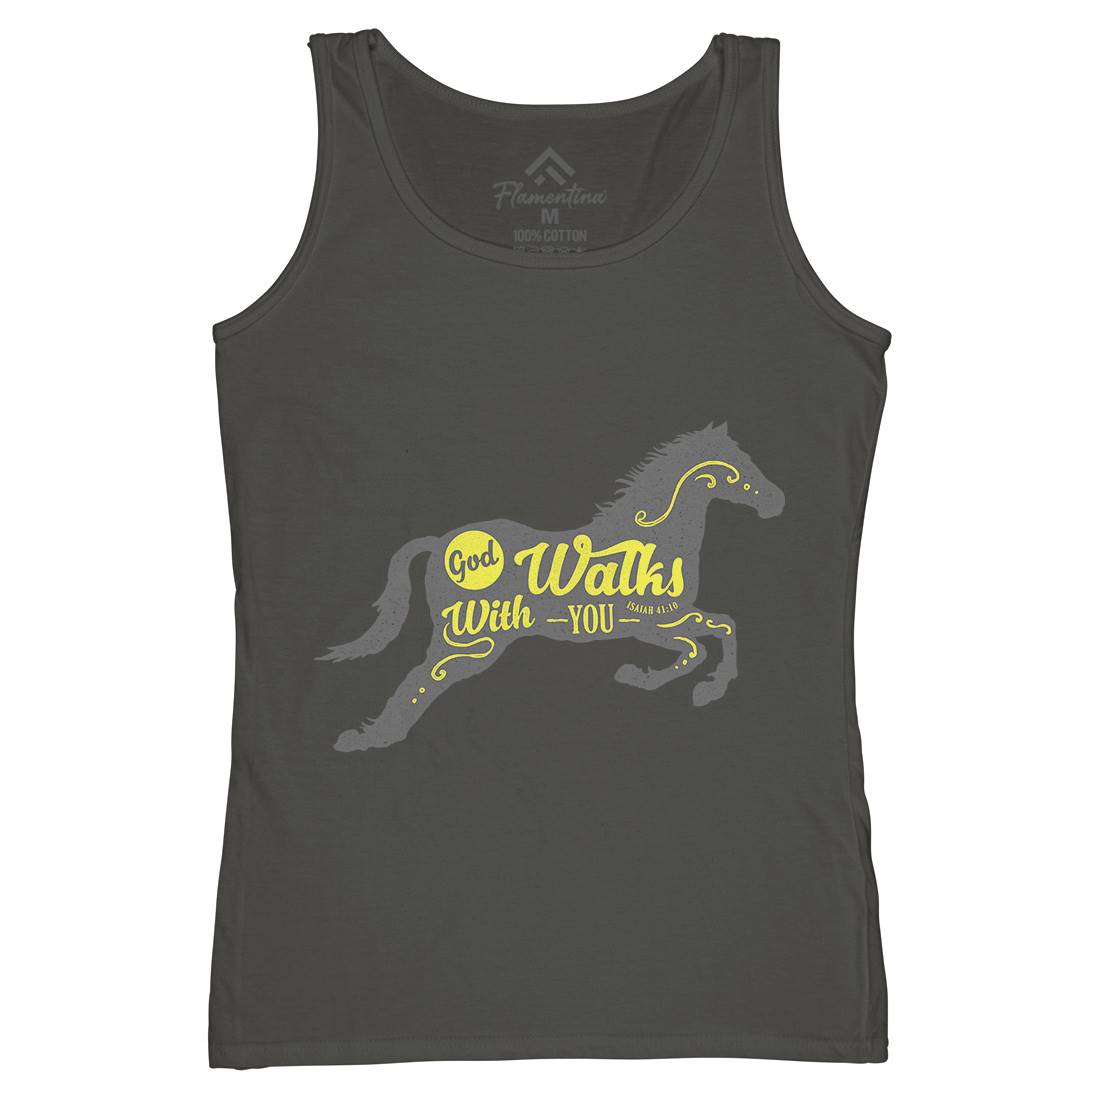 God Walks With You Womens Organic Tank Top Vest Religion A320